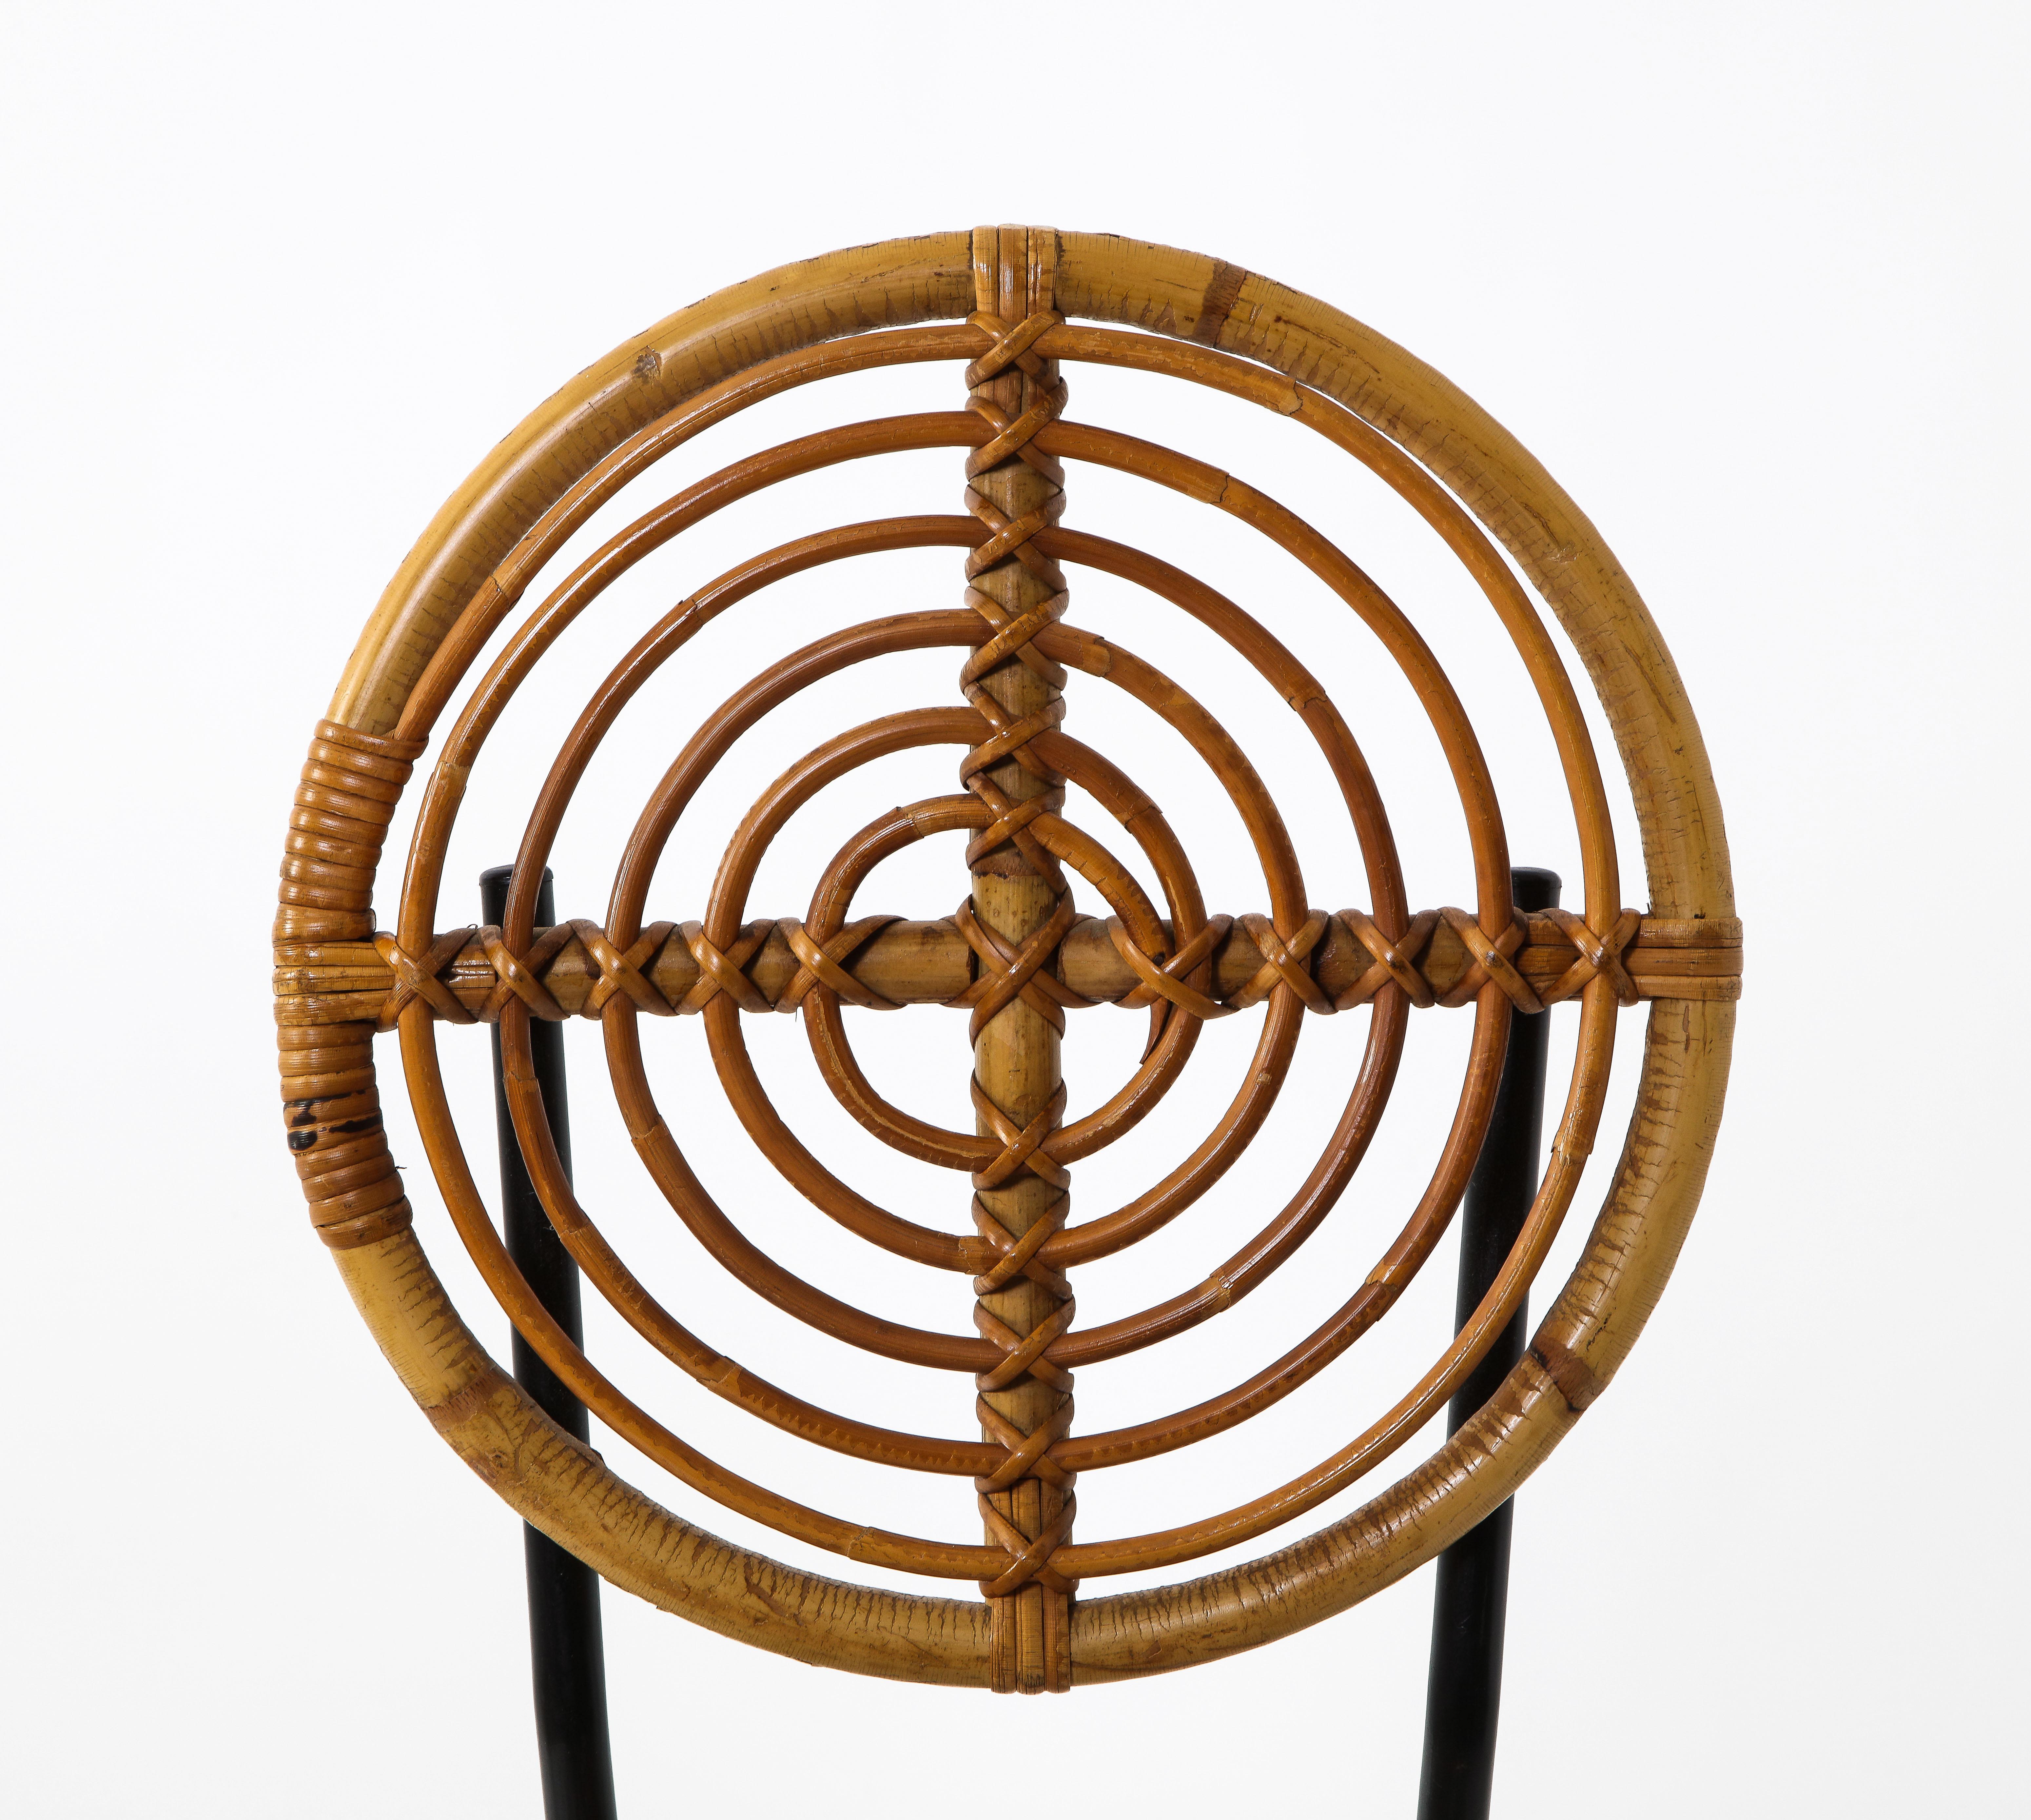 Pair of rattan and painted metal disc chairs, France, 1950s. Disc shaped seats and backs in unique and interesting concentric pattern. Black metal frames. Great sculptural pieces as pull up or side chairs.